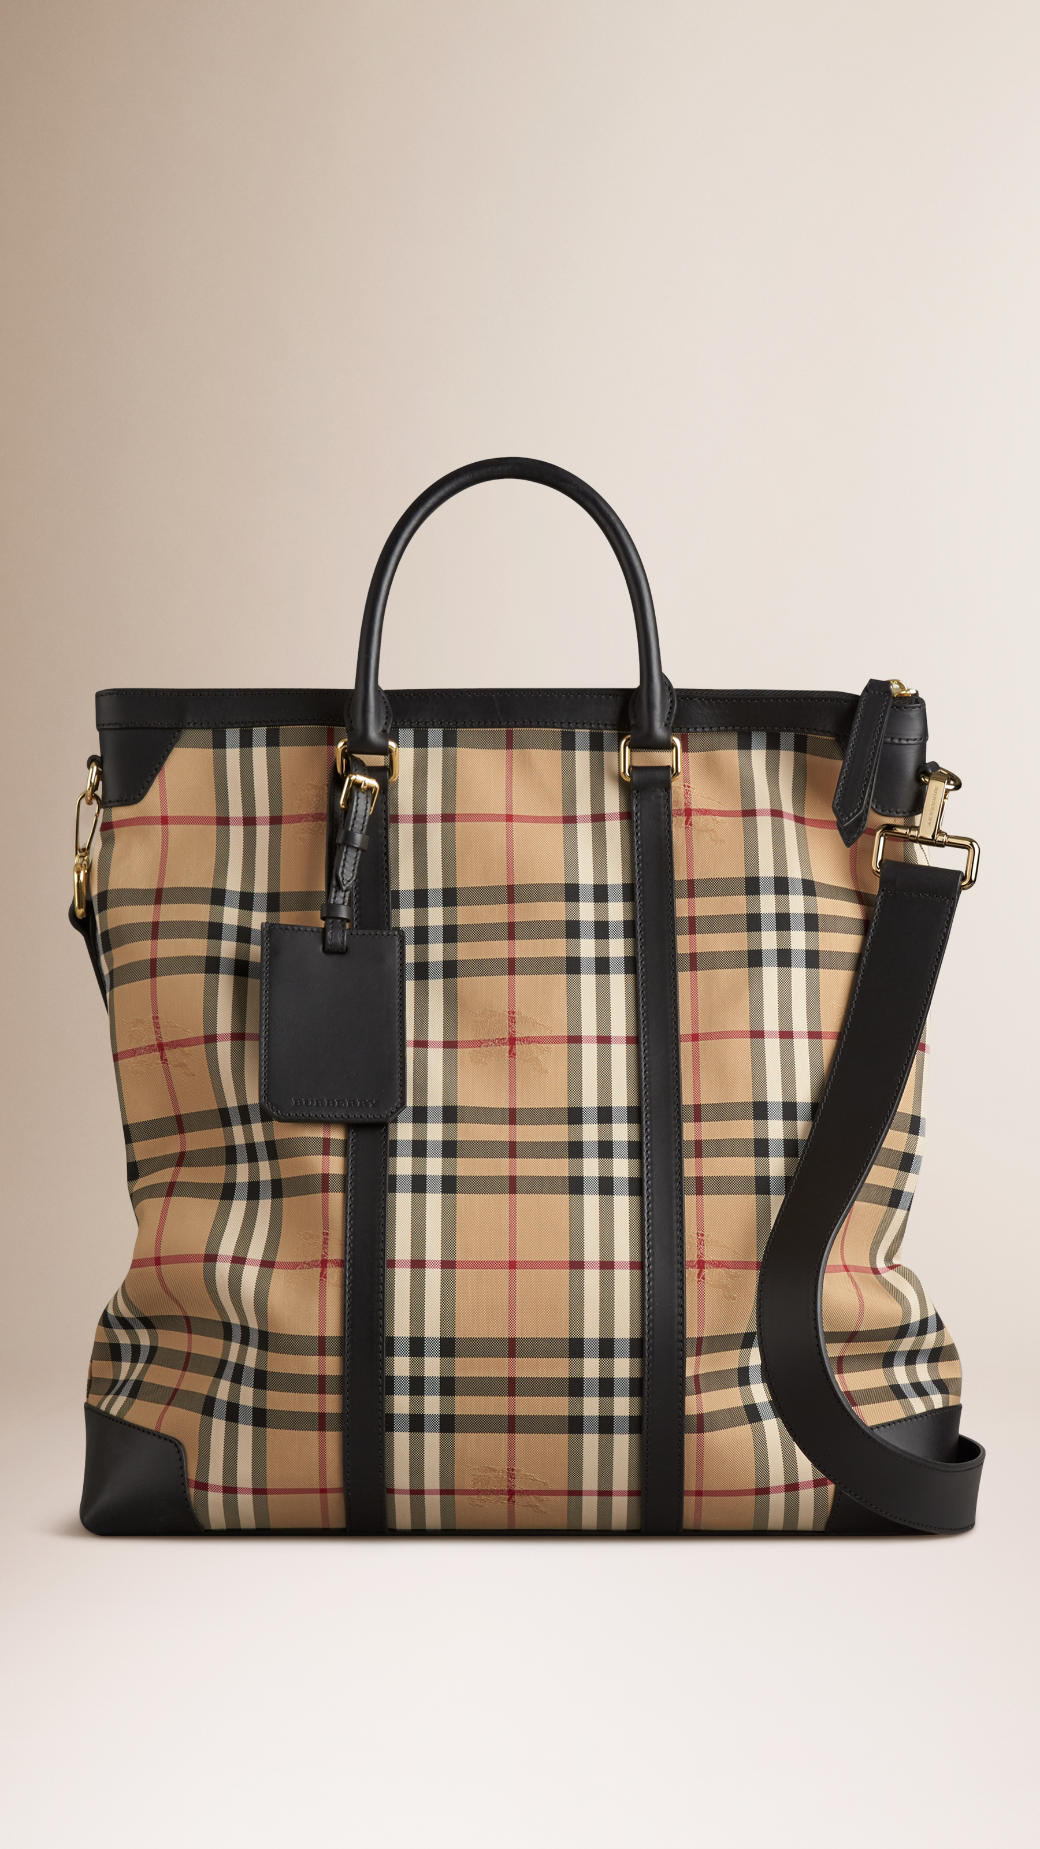 Lyst - Burberry Large Horseferry Check Leather Tote Bag in Black for Men